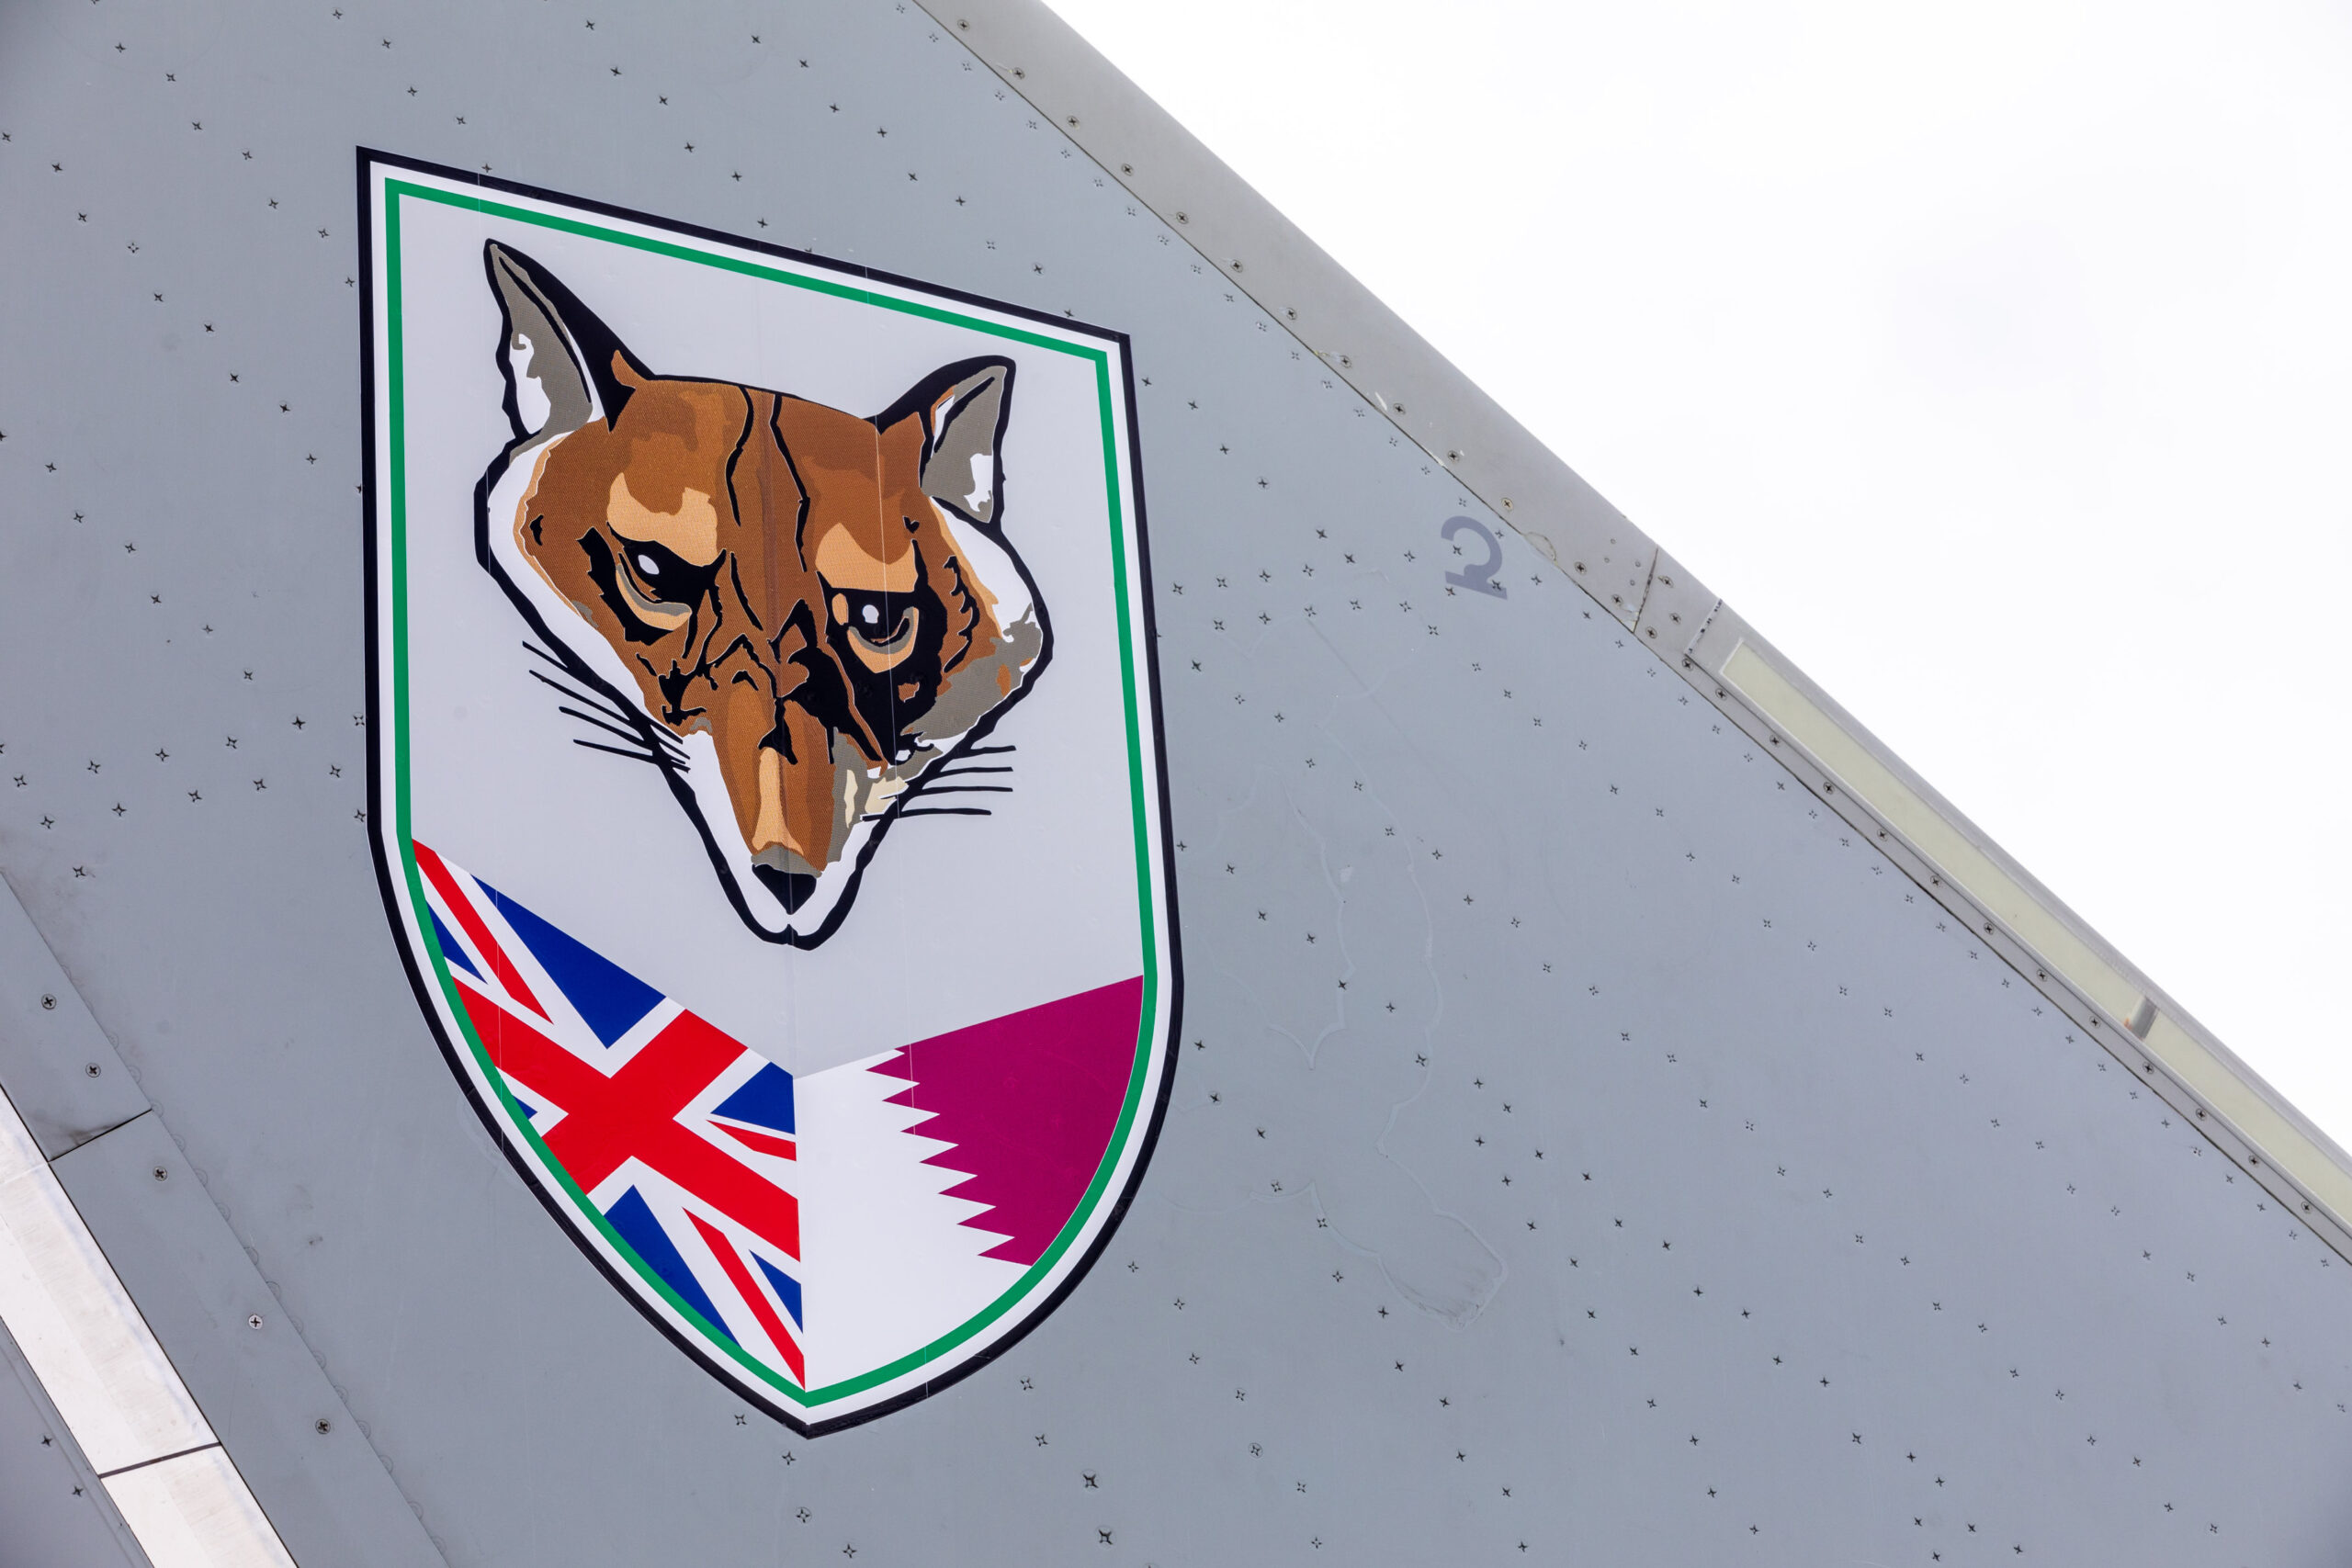 The Royal Air Force and Qatar Emiri Air Force (QEAF) Typhoon Squadron, known as No.12 Squadron, have marked an important milestone as they commenced flying as a Joint Squadron today.Based at RAF Coningsby, and later in Qatar, No.12 Squadron is a unique initiative between the UK and Qatar and will provide the QEAF with valuable experience operating the Typhoon as they prepare for their first delivery of the aircraft. Due to be delivered in 2022, the aircraft are part of a £5.1 billion deal between BAE Systems and the Government of Qatar. The flags of both nations were raised at RAF Coningsby today as Typhoons with new Squadron markings flew for the first time, signalling the Squadrons readiness to train pilots and ground crew from both air forces. The UK has a long history of working with international partners into our Armed Forces, with such defence engagement recognised as key to strengthening partnerships and promoting our national interest. However, No. 12 Squadron is the first Joint Squadron in the RAF since the Second World War and Battle of Britain. The Joint Squadron was stood up on 24 July 2018 and will drive closer collaboration between the RAF and QEAF, putting our bilateral security and defence relationship on a long-term and sustainable footing.